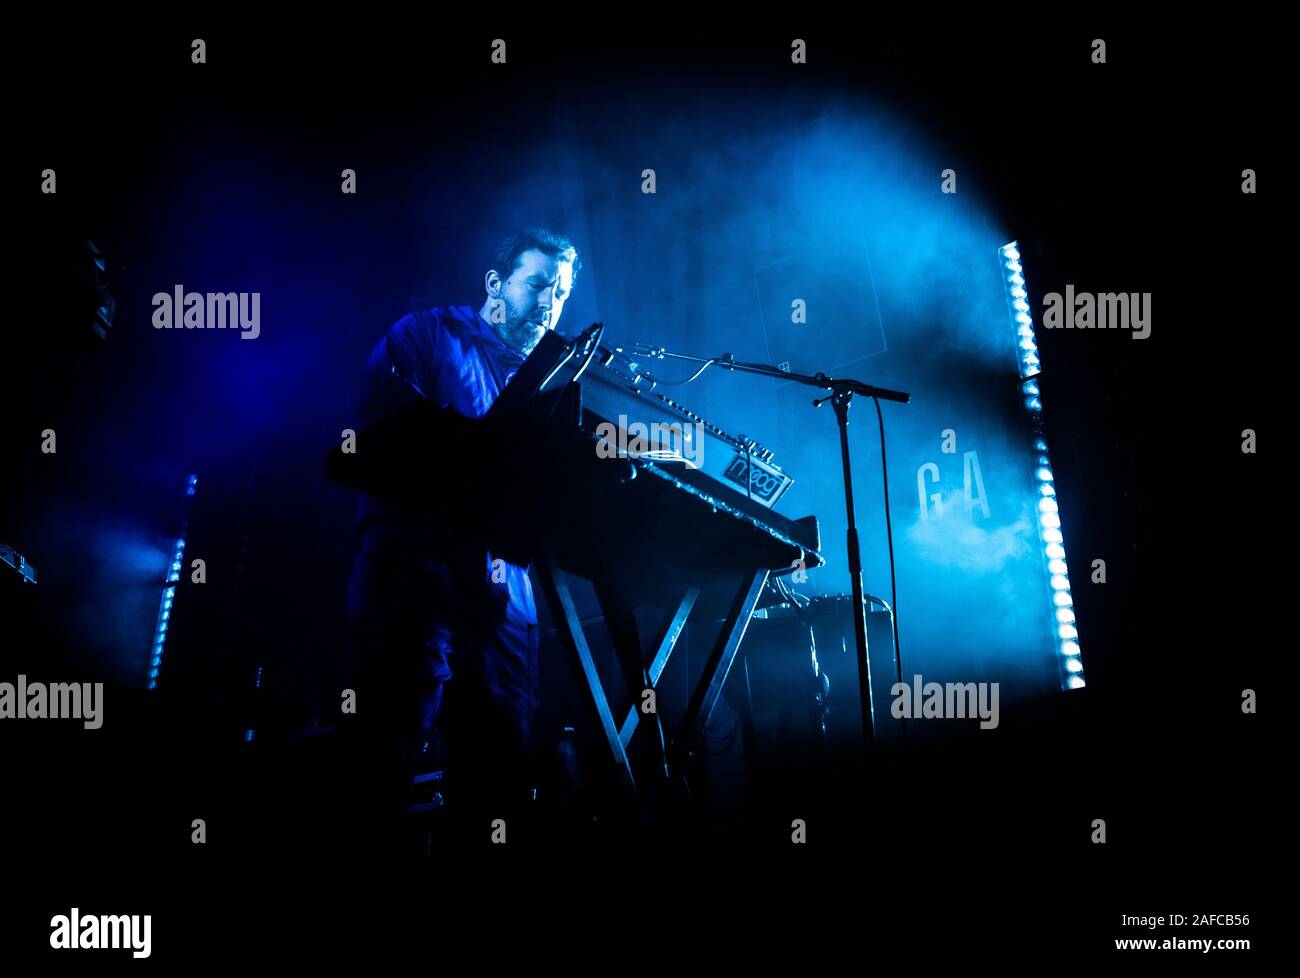 Copenhagen, Denmark. 12th, December 2019. The British electronic music band Hot Chip performs a live concert at VEGA in Copenhagen. Here musician Joe Goddard is seen live on stage. (Photo credit: Gonzales Photo - Joe Miller). Stock Photo